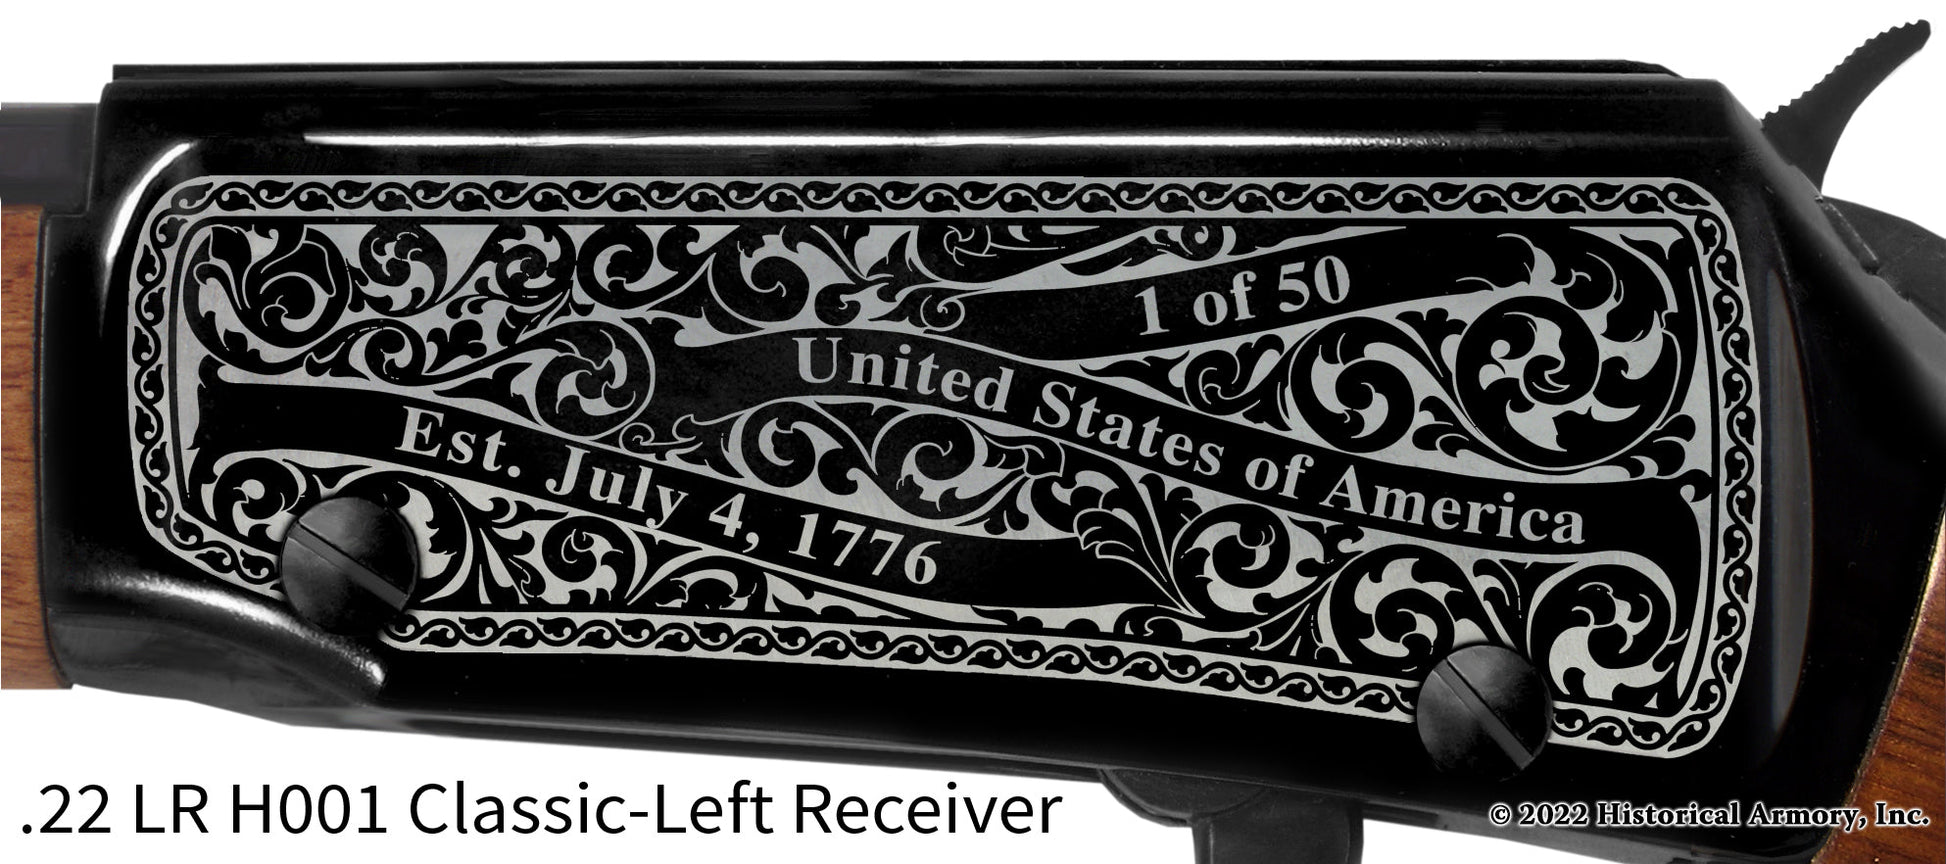 St. Louis County Minnesota Engraved Henry H001 Rifle